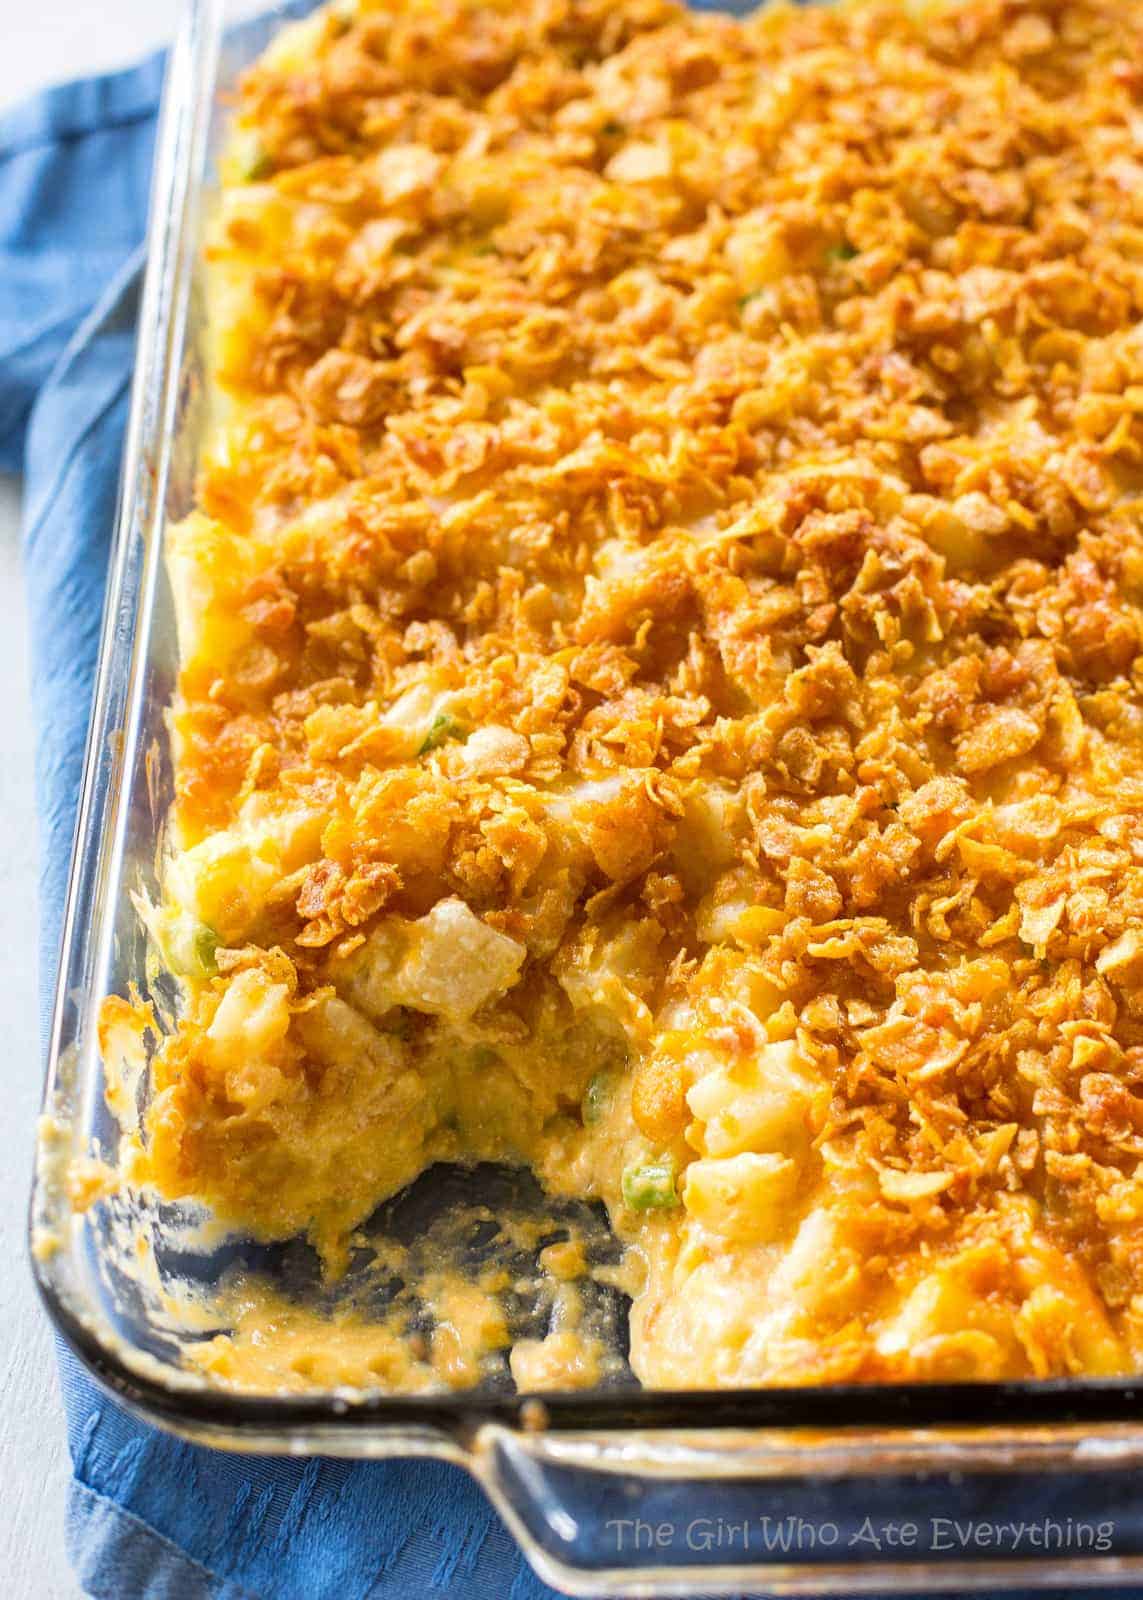 Funeral Potatoes - creamy, cheesy potatoes topped with buttery crunchy cornflakes. These are always a hit at get togethers. #funeral #potatoes #sides #dish #recipe #potluck